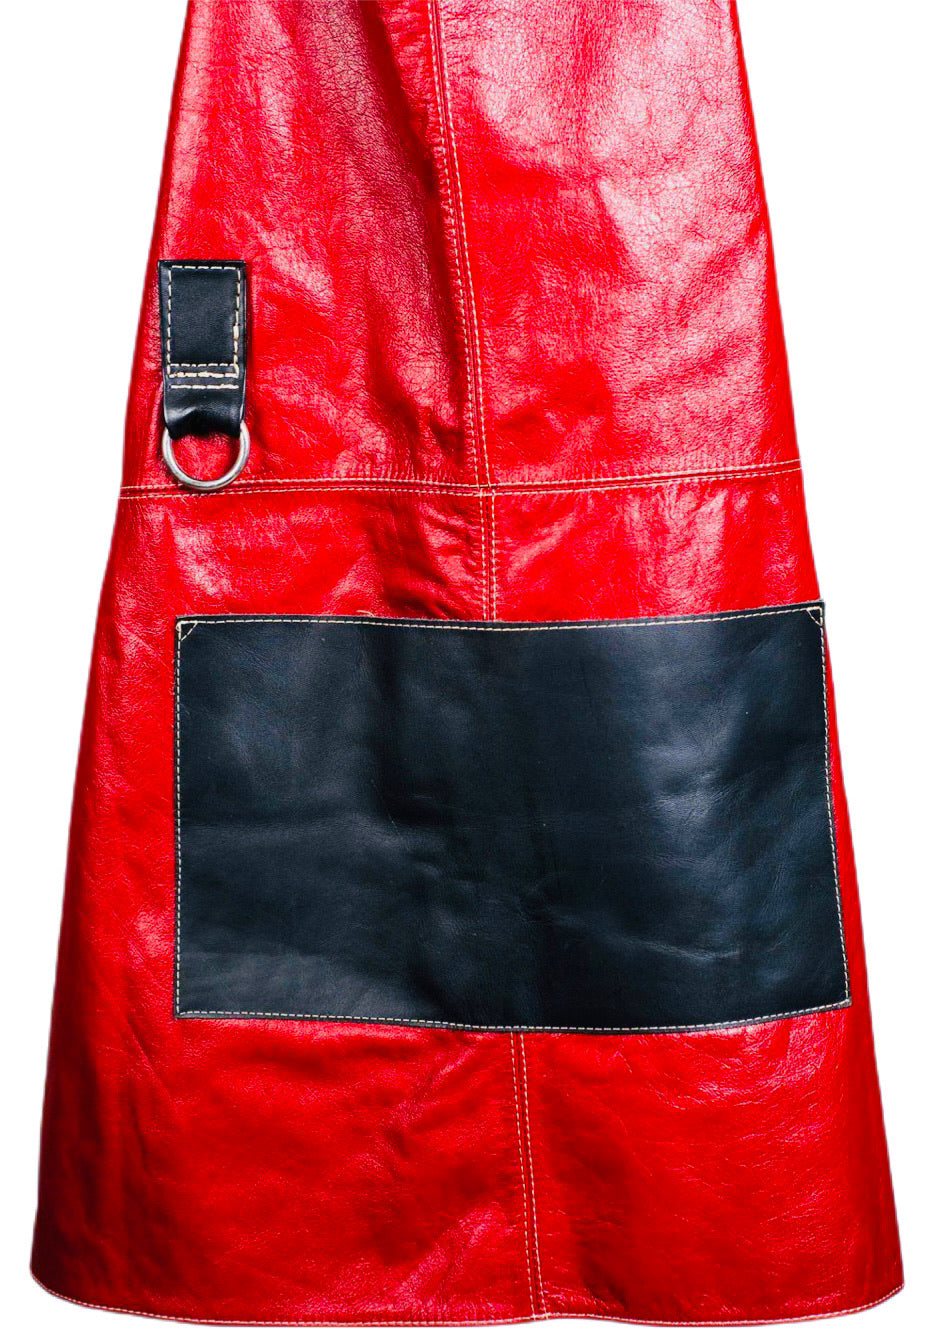 Zoomed in Red & Black Leather Apron 